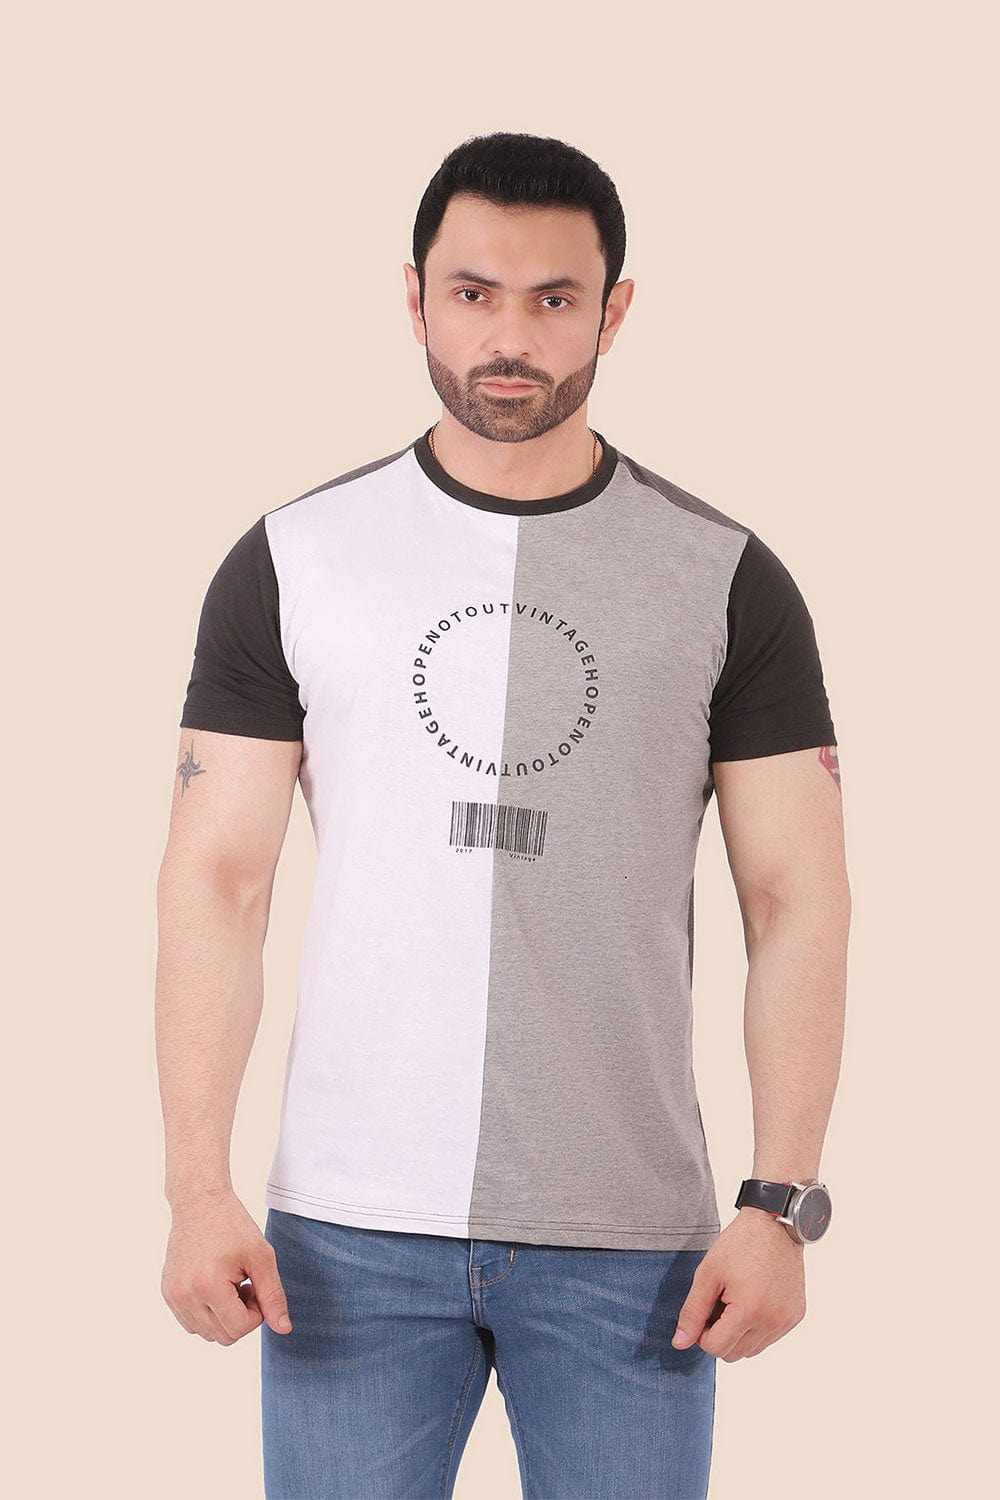 Hope Not Out by Shahid Afridi Men T-Shirt Premium Crew Neck T-Shirt With Vertical Panels